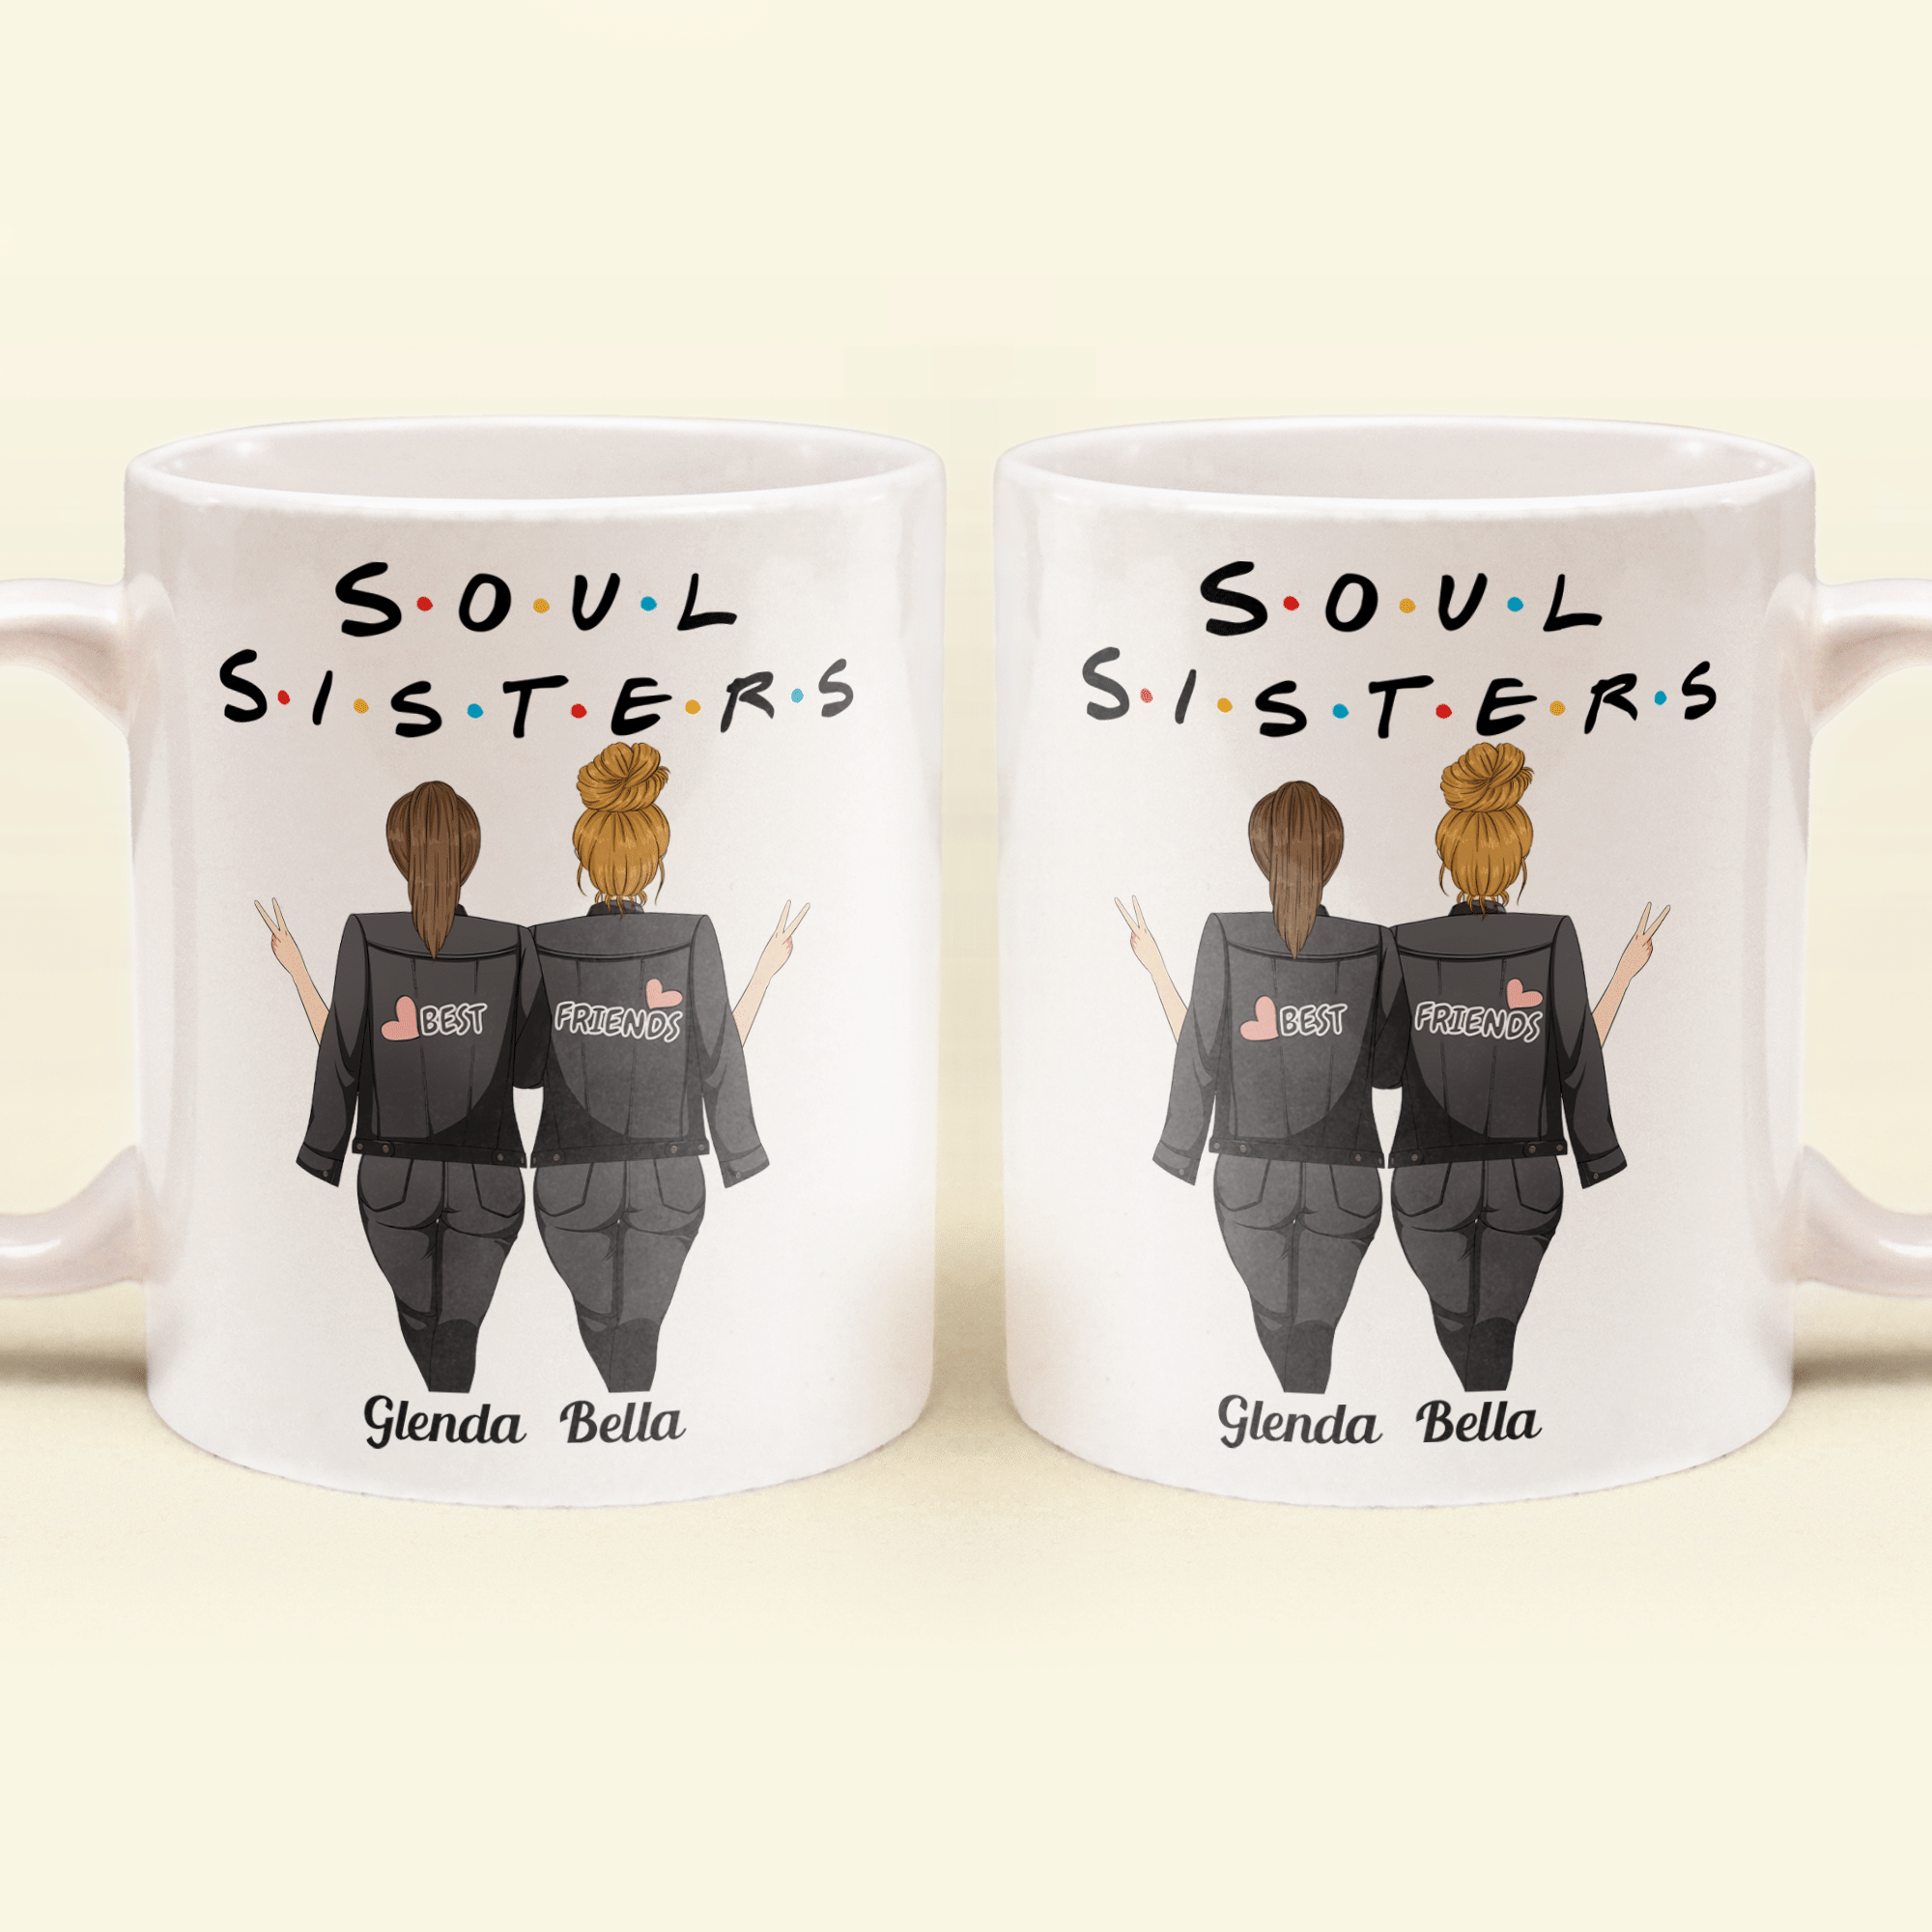 Soul Sisters Ver 2 - Personalized Mug - Birthday, Christmas Gift For Sister, Soul Sister, Best Friend, BFF, Bestie, Friend - Standing Girls Illustration